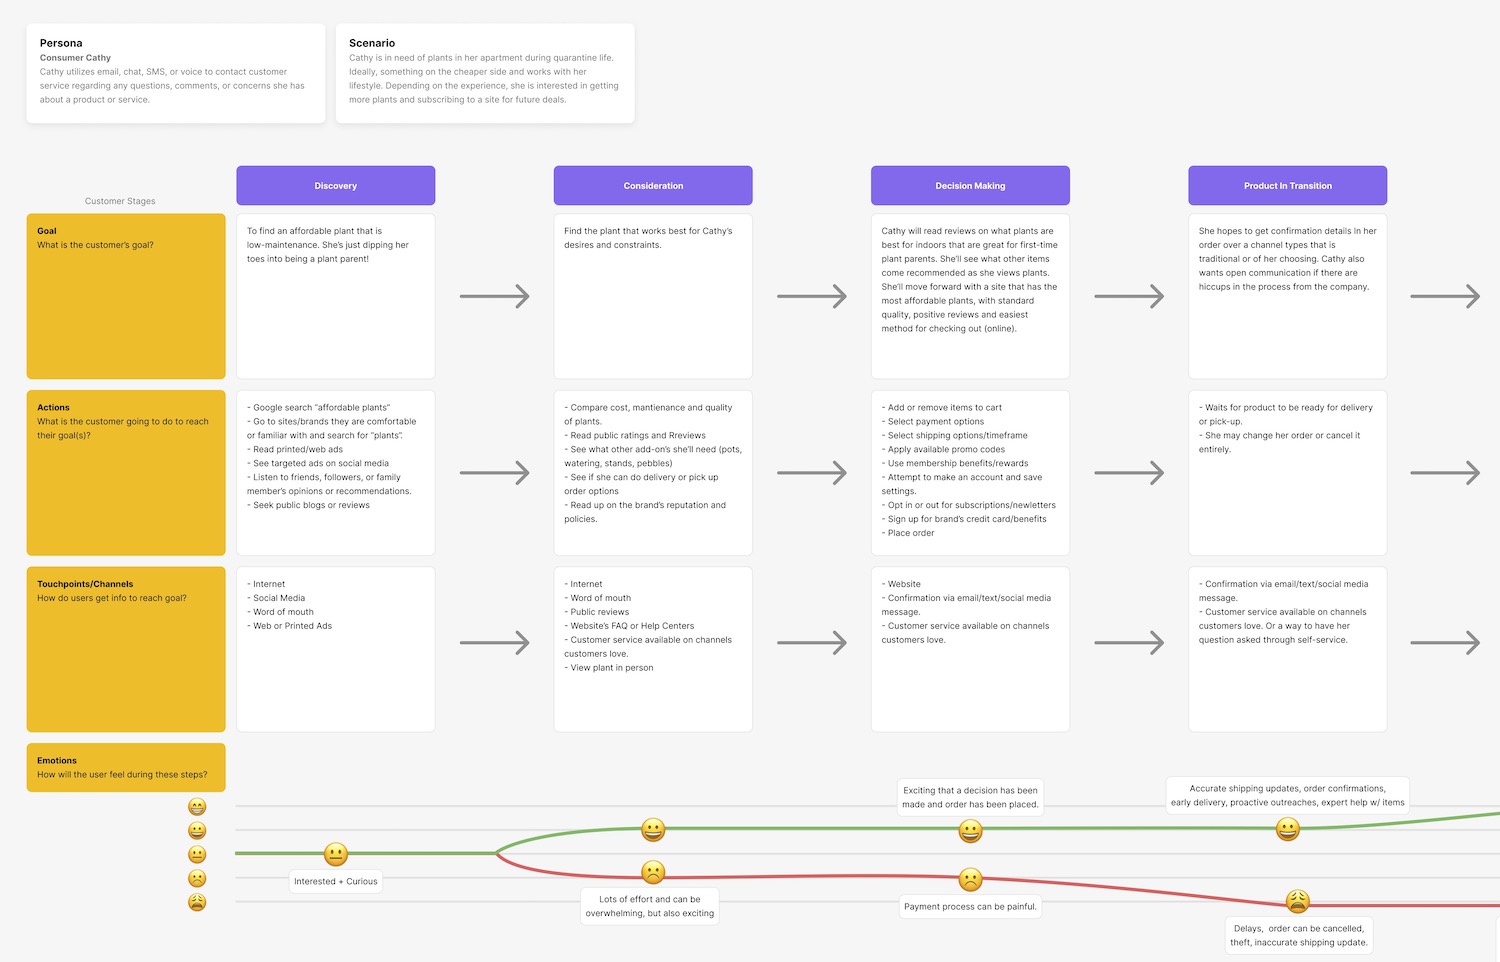 A user journey map typically plots customer pain points and moments of delight.